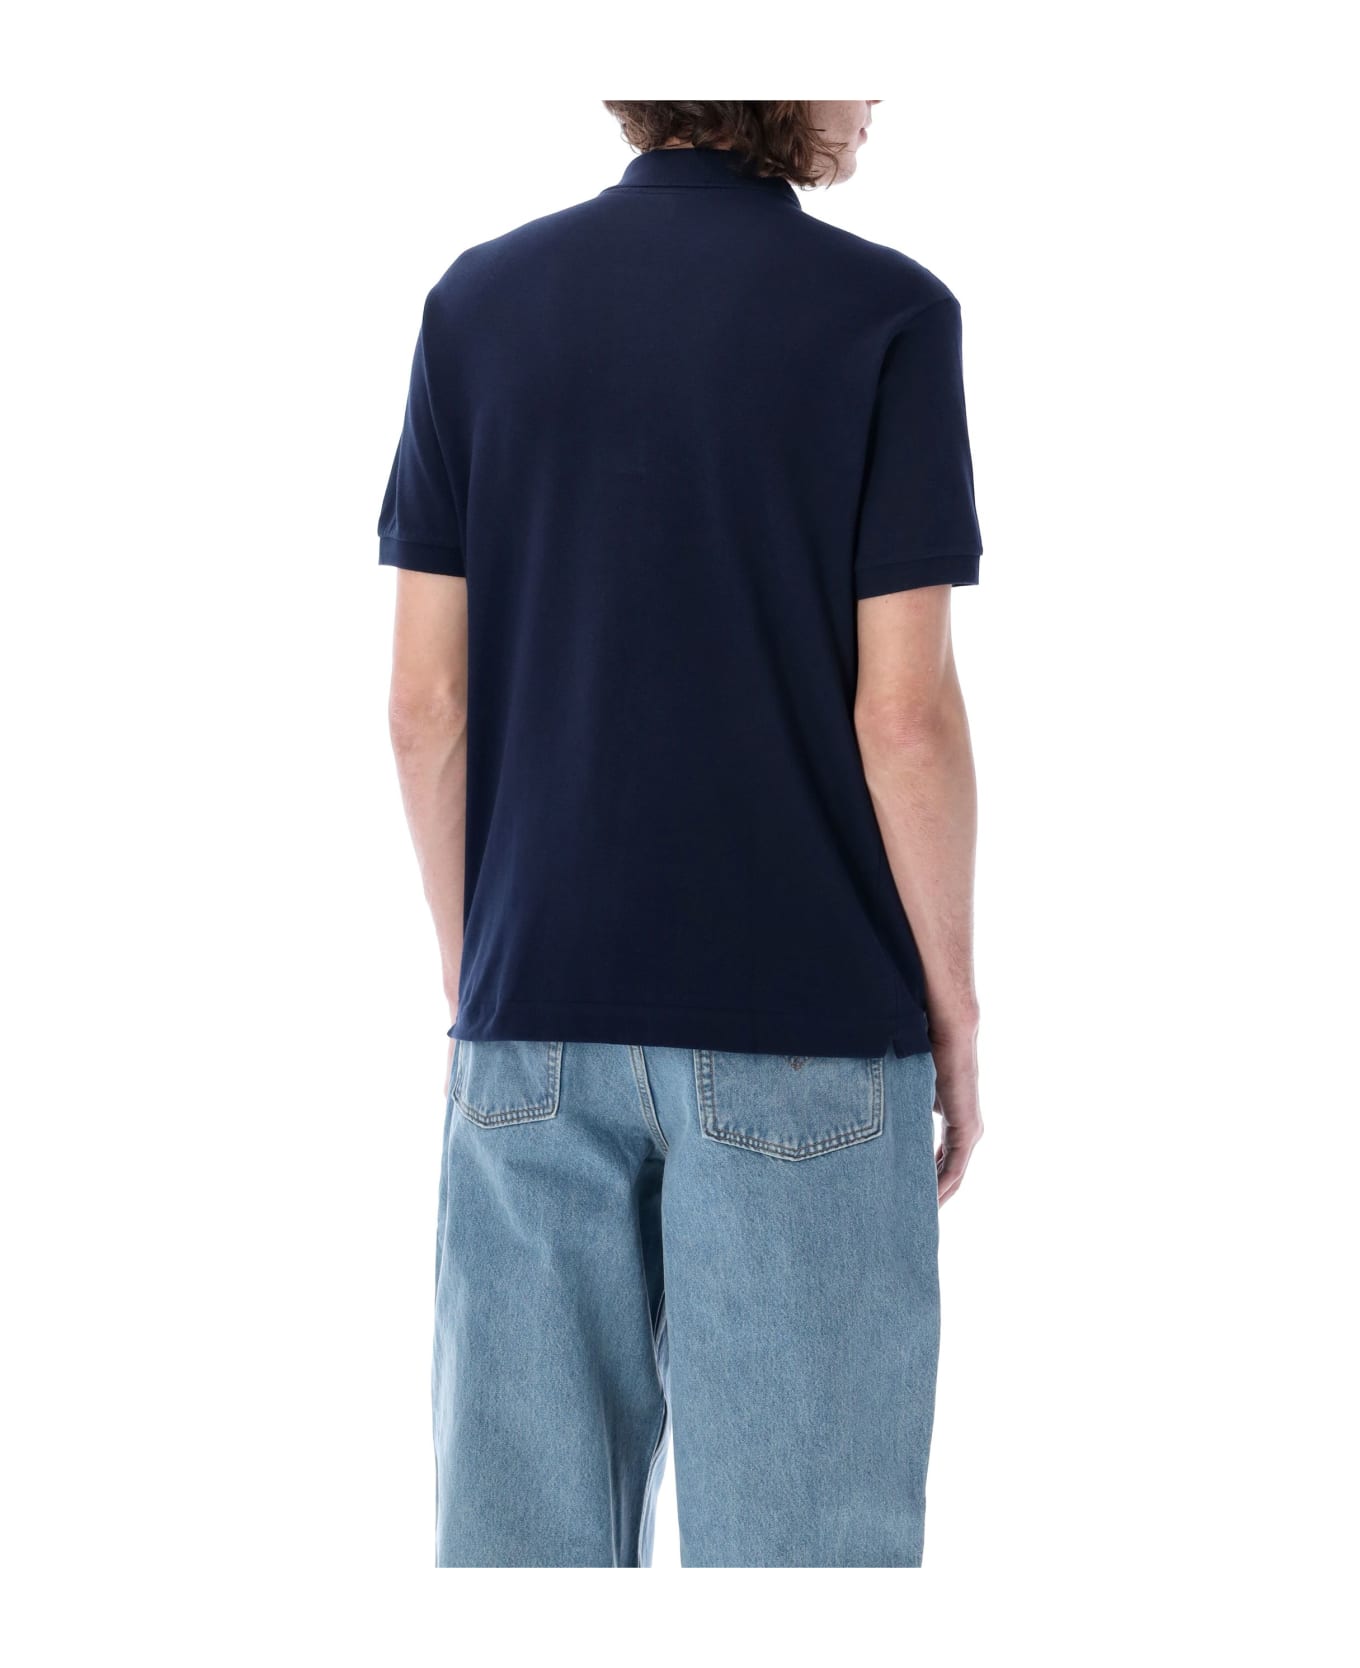 Lacoste Classic Fit Polo Shirt - MARINE ポロシャツ